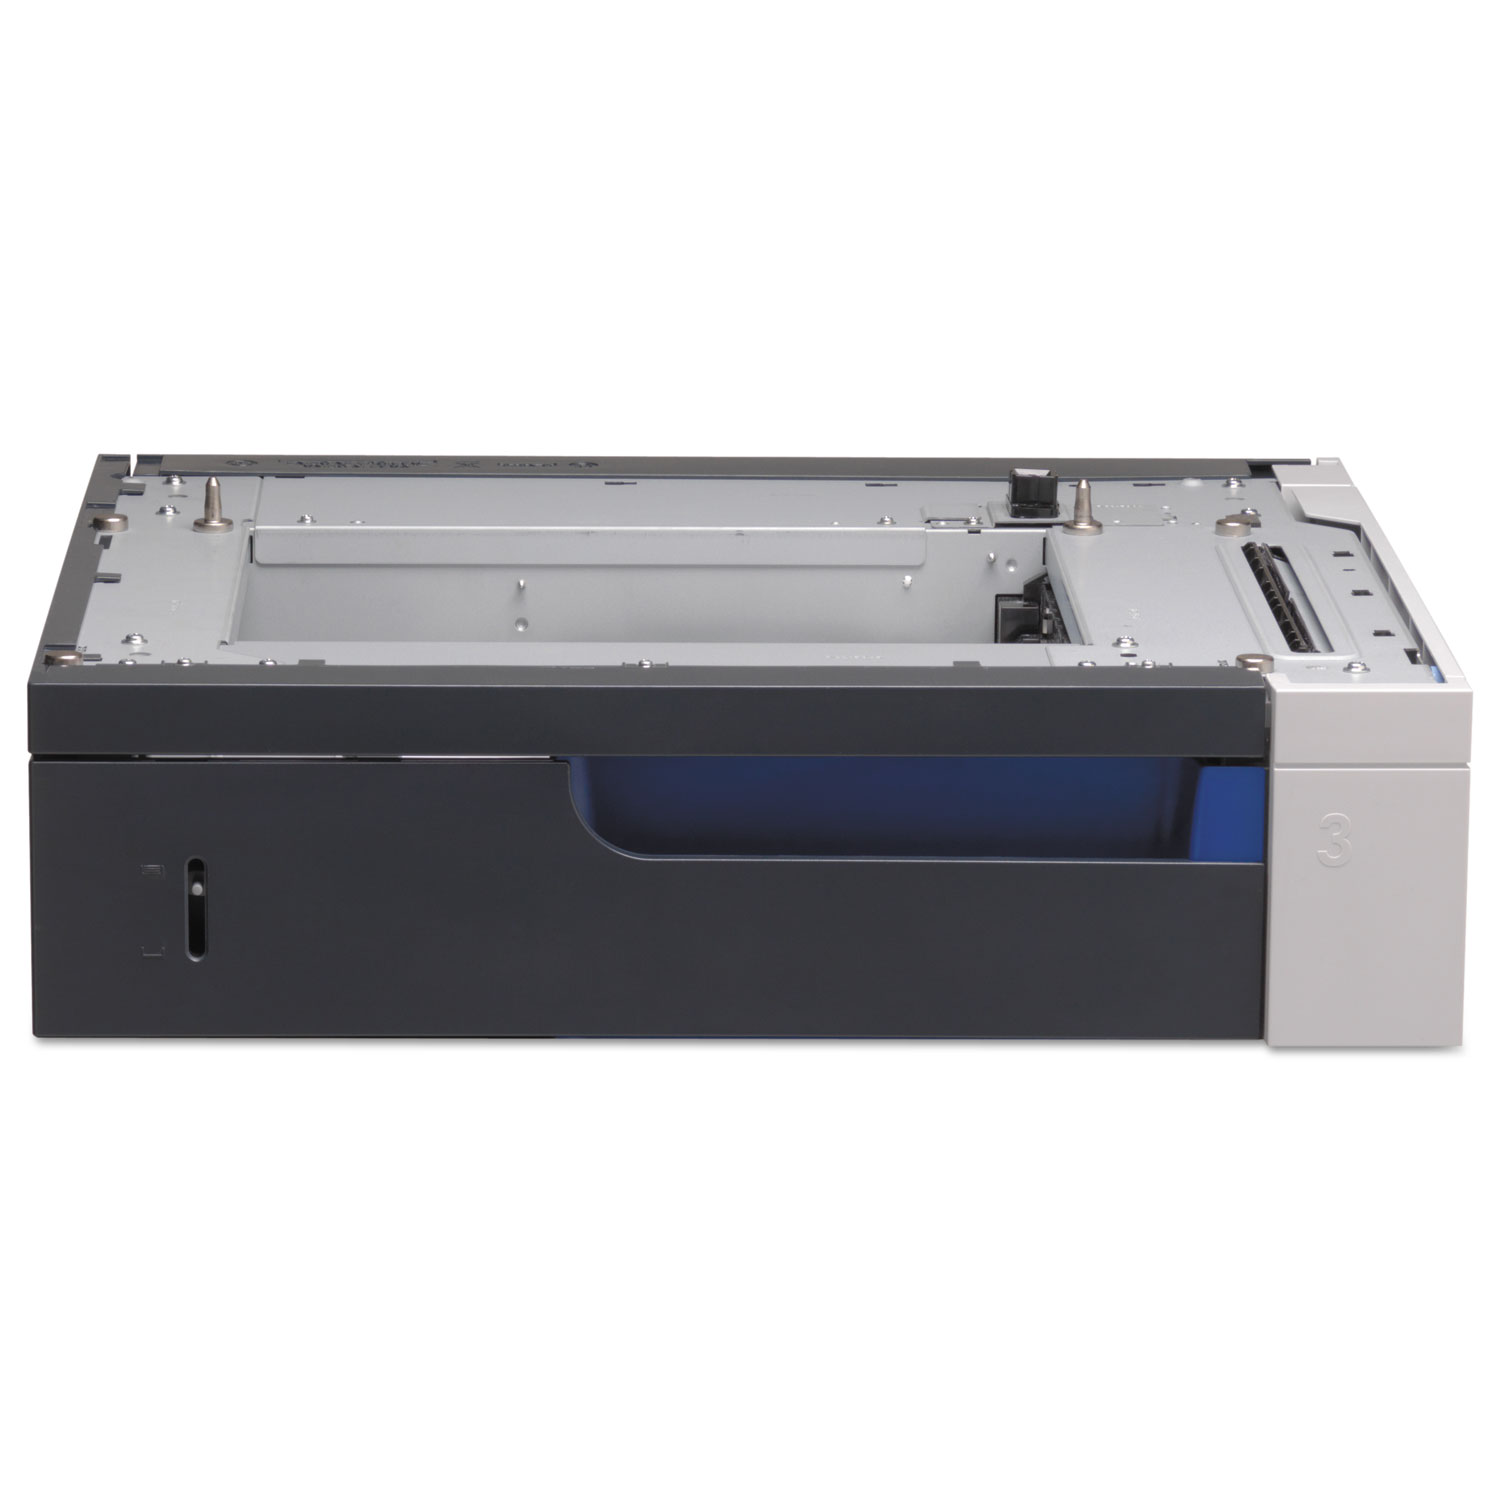  HP CE860A Paper Tray for LaserJet CP5525/5225 Series, 500 Sheet (HEWCE860A) 